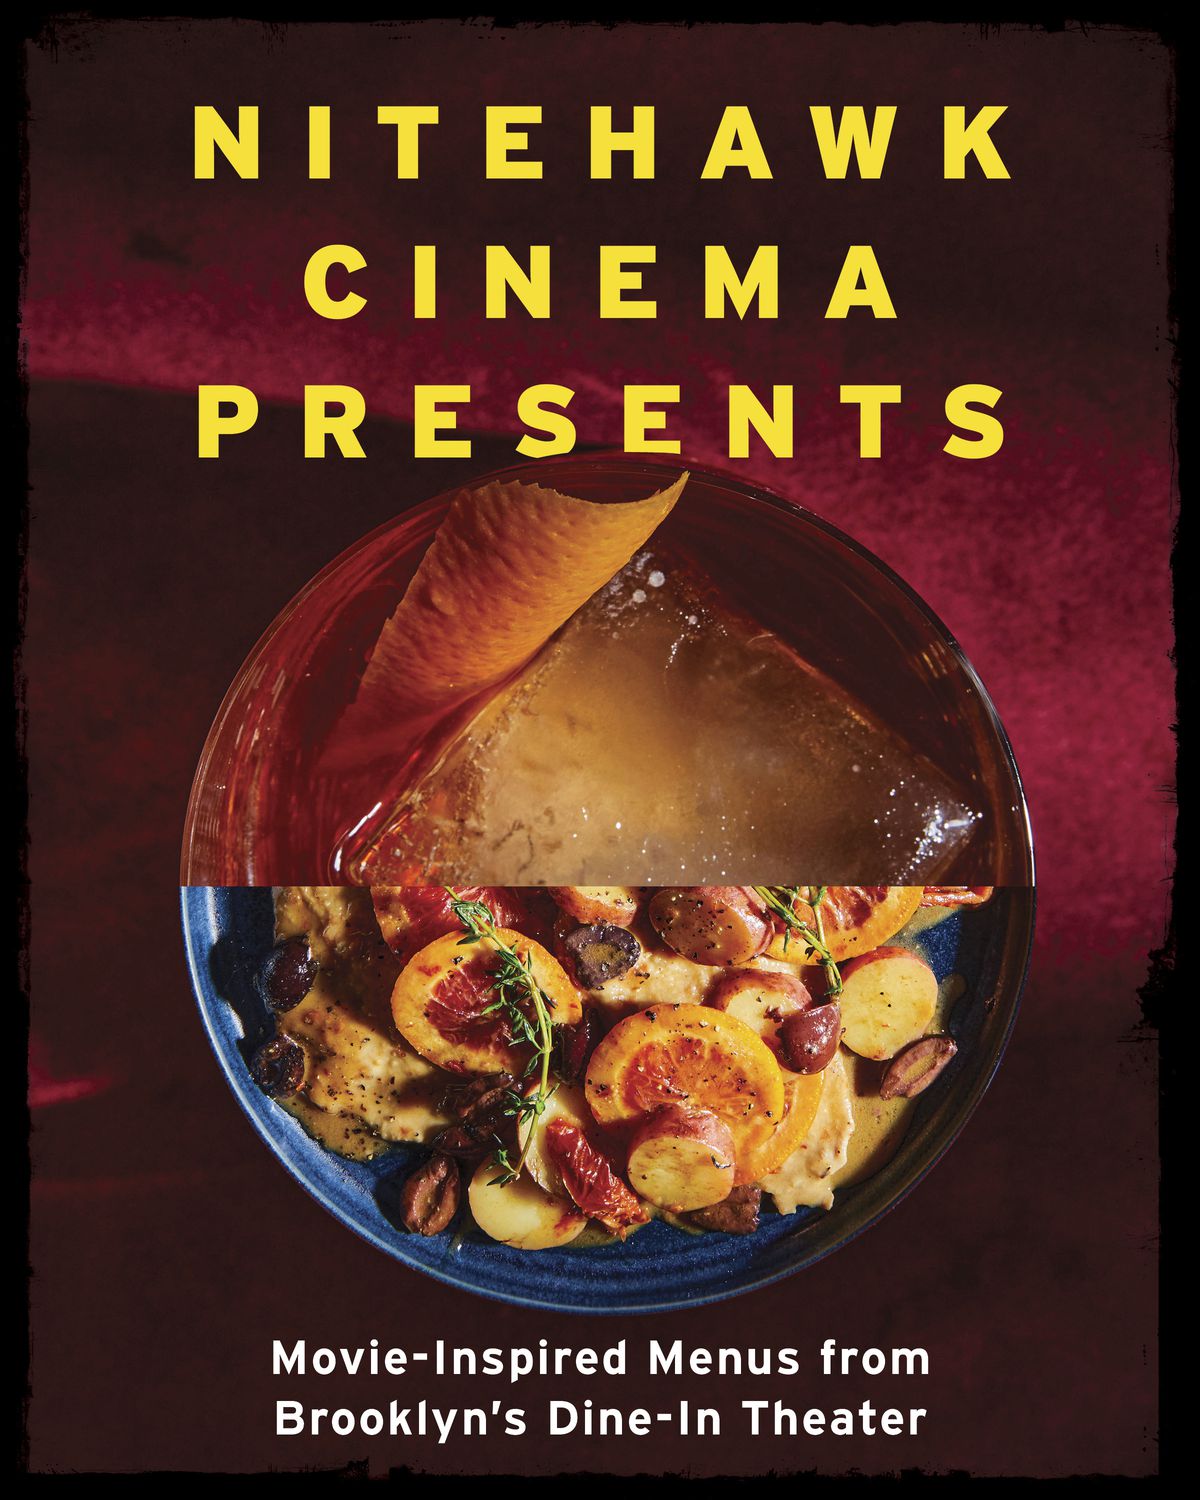 This cover image released by Countryman Press shows “Nitehawk Cinema Presents: Movie-Inspired Menus from Brooklyn’s Dine-In Theater.”